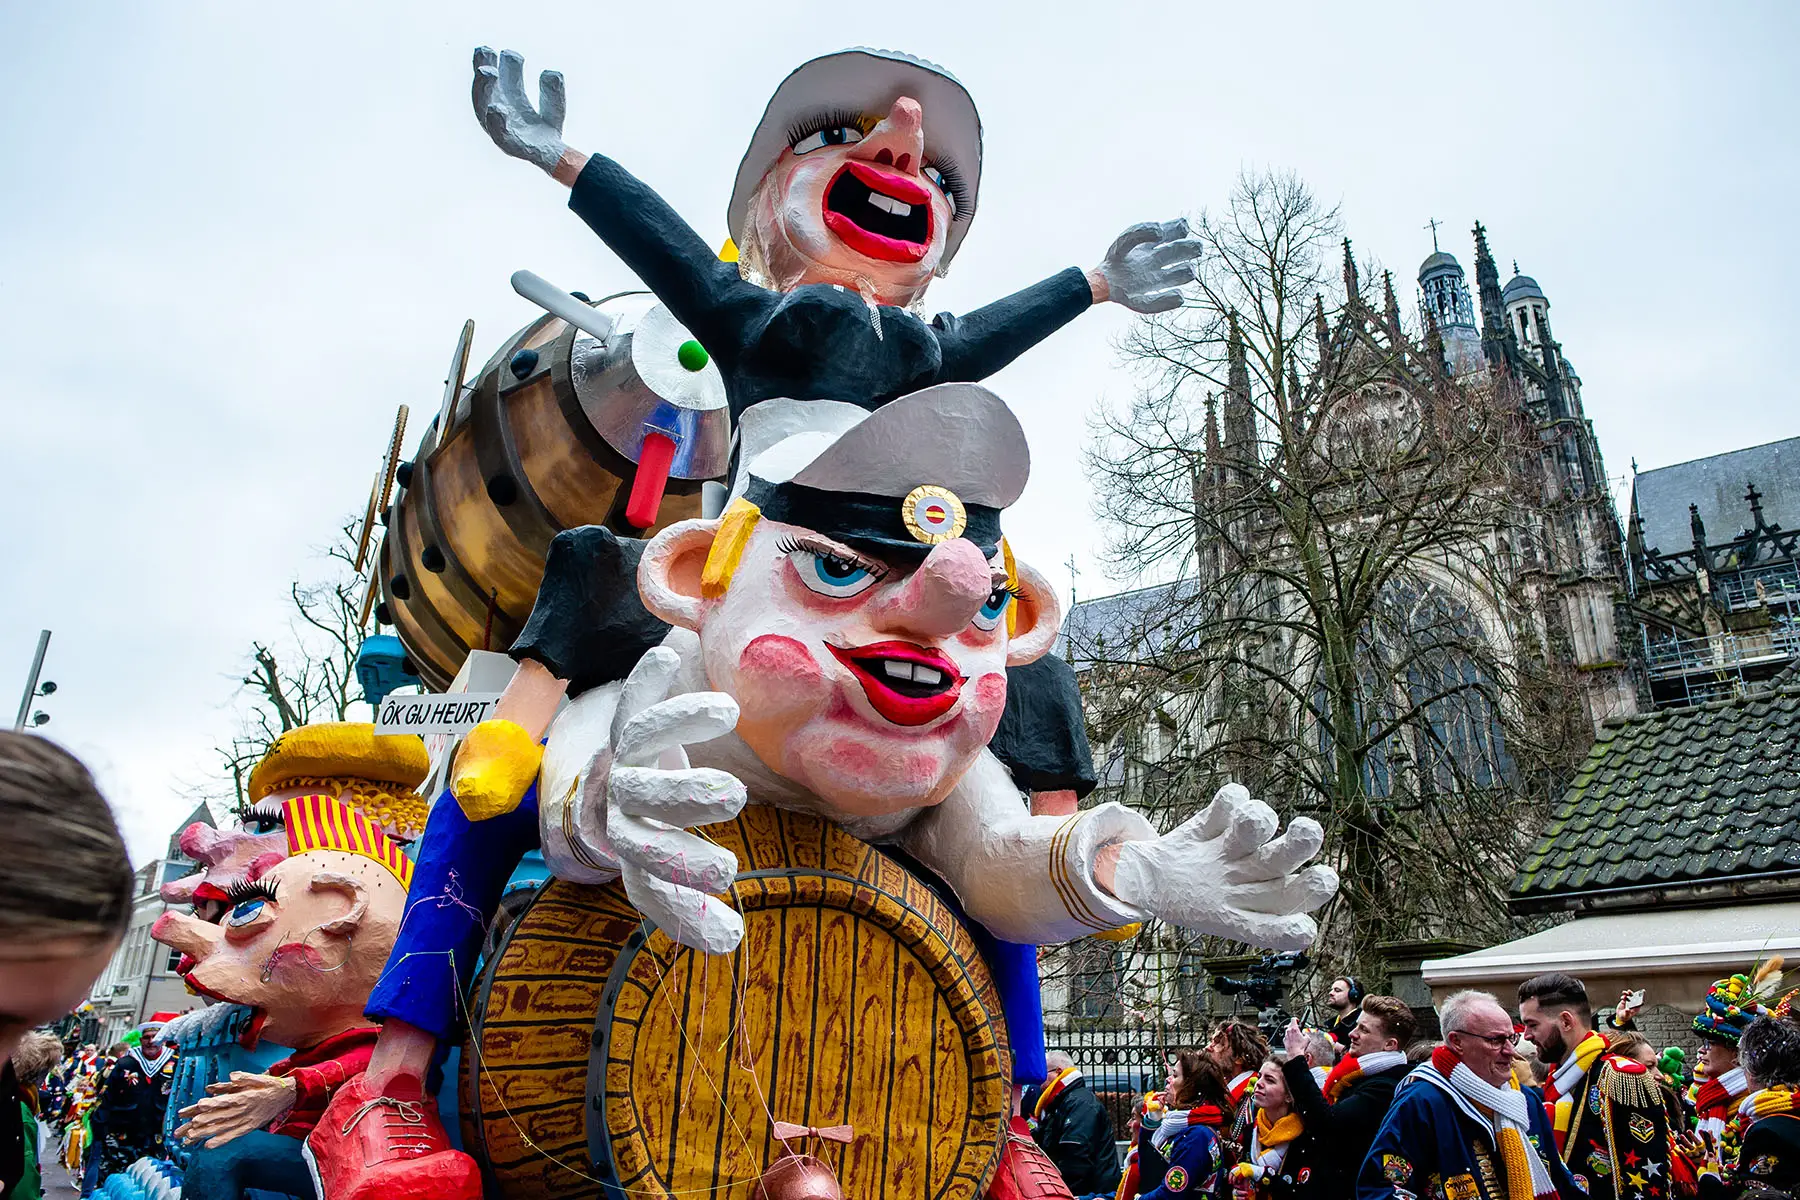 Large floats riding in the carnival parade in Den Bosch, the Netherlands.